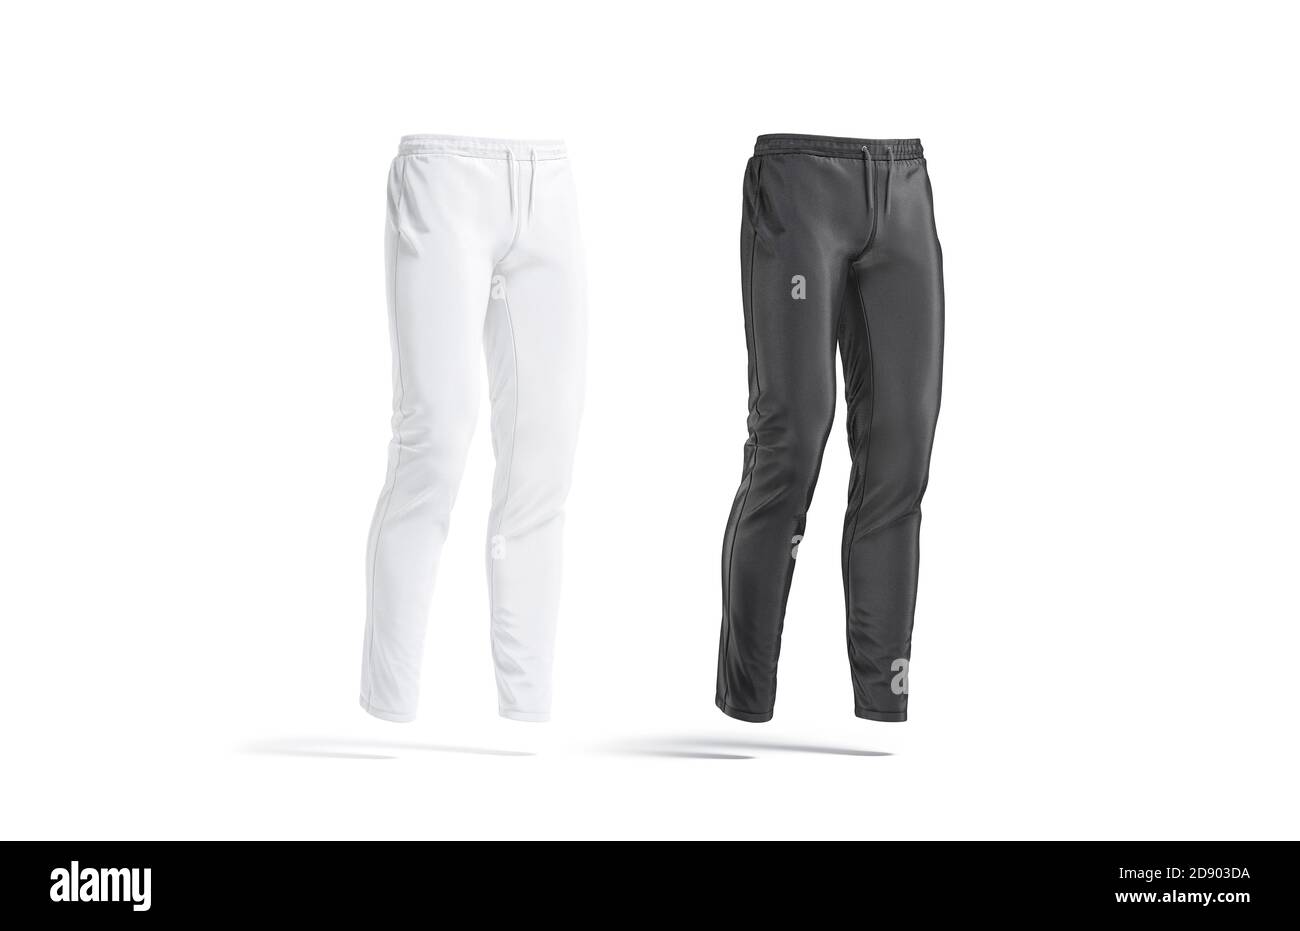 Blank black and white sport pants mockup, side view Stock Photo - Alamy